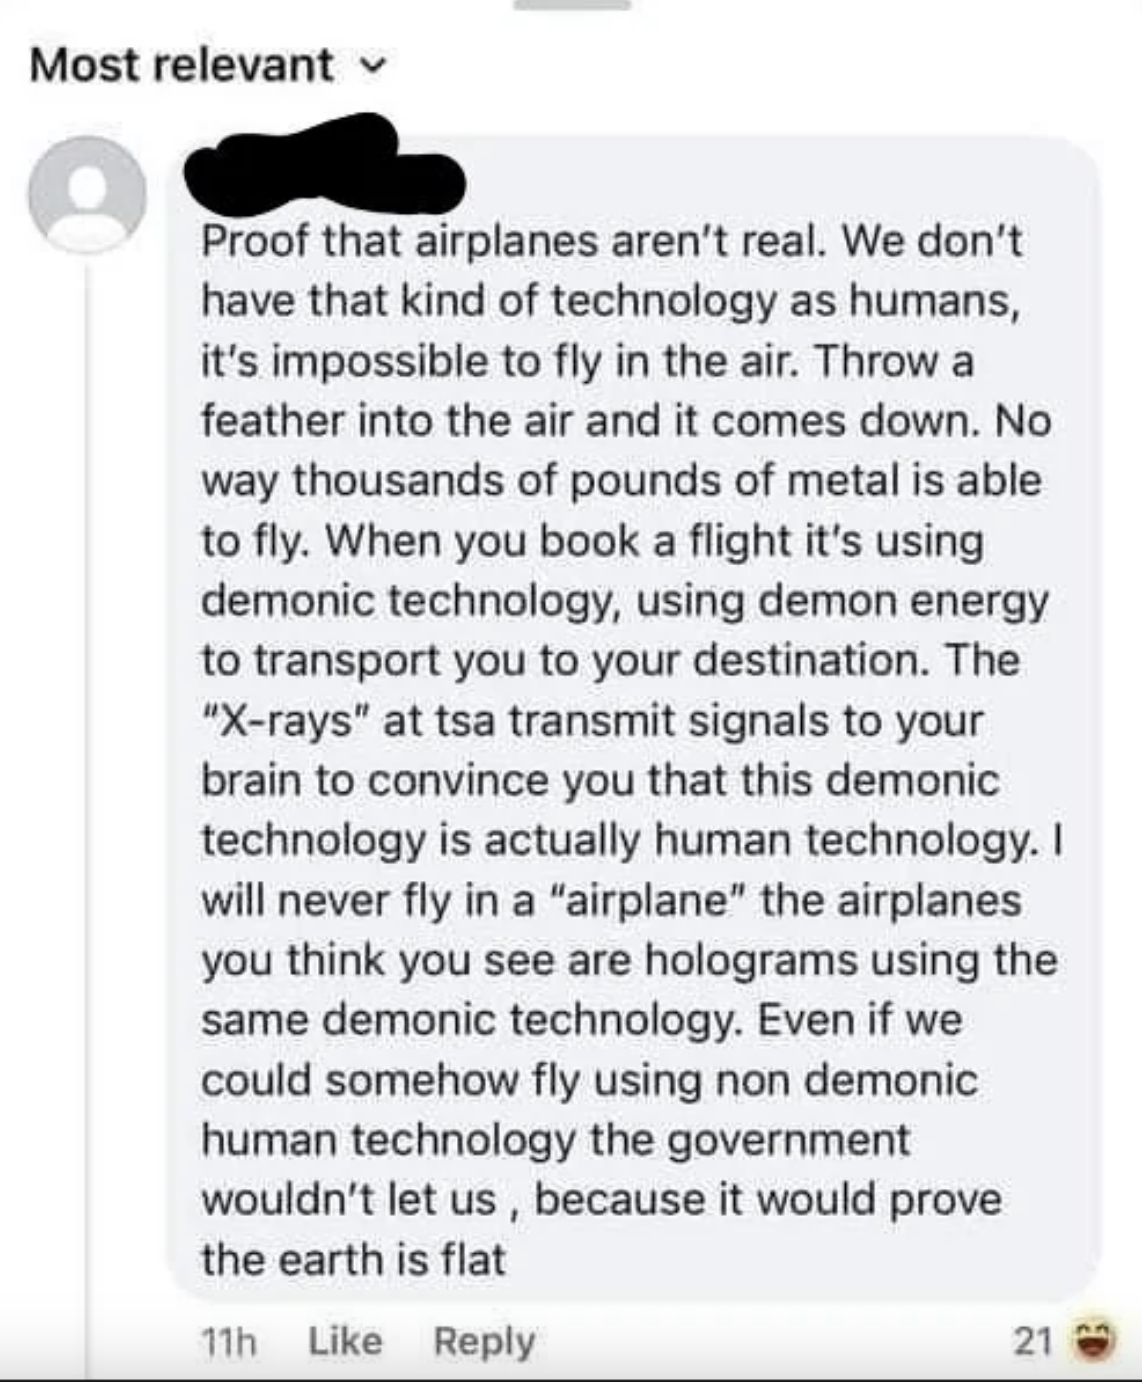 Summarized screenshot of a social media comment speculating on technology and dismissing airplanes, referencing holograms and government secrets